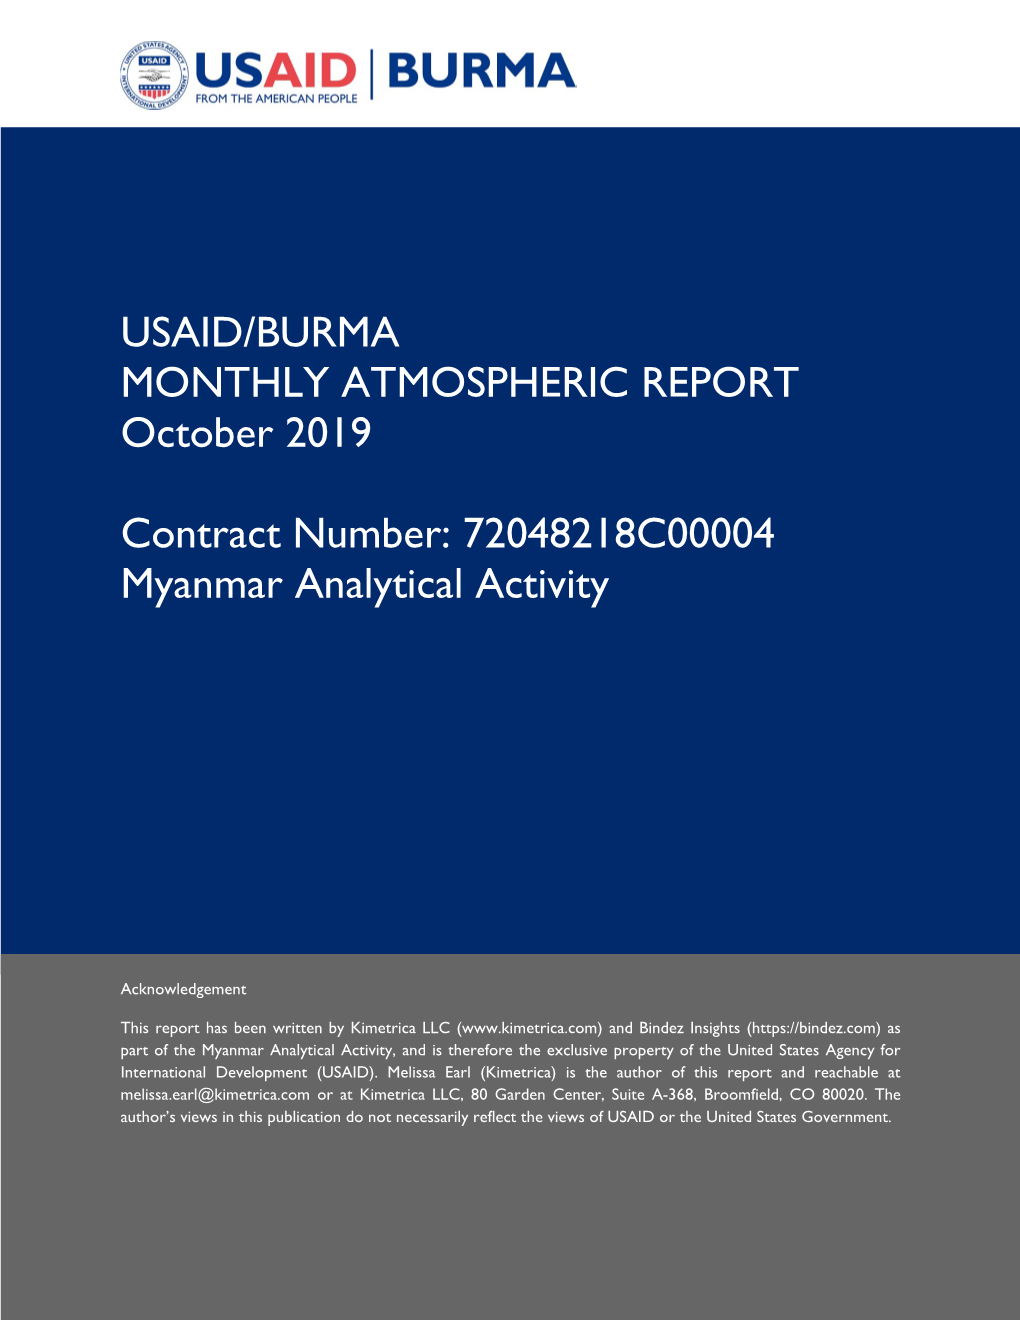 USAID/BURMA MONTHLY ATMOSPHERIC REPORT October 2019